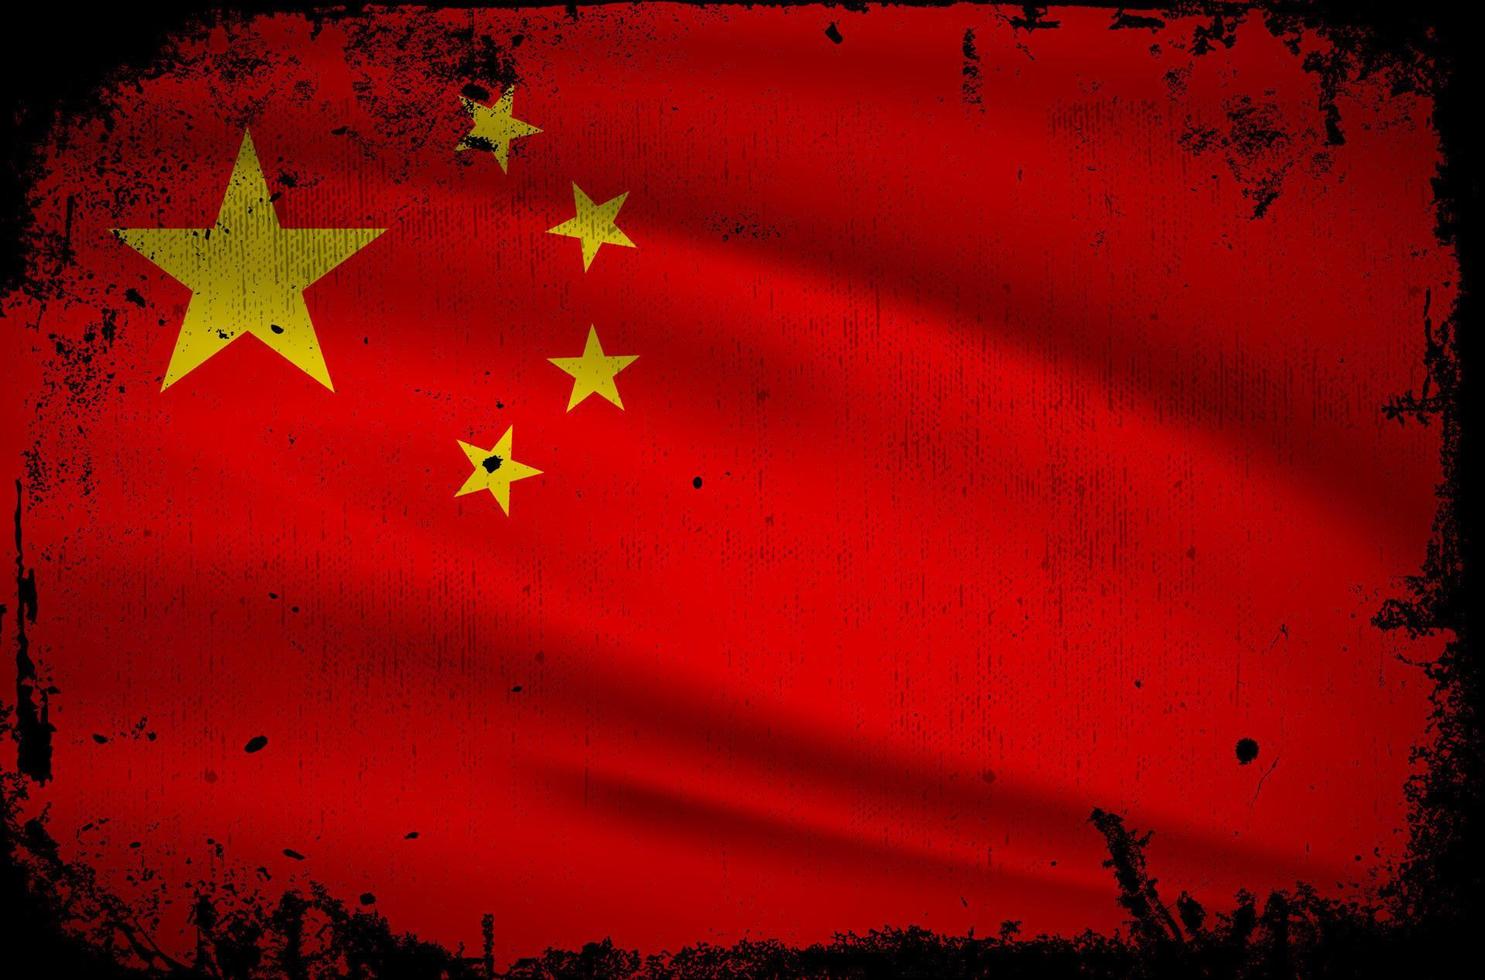 New Abstract China flag background vector with grunge stroke style. China Independence Day Vector Illustration.